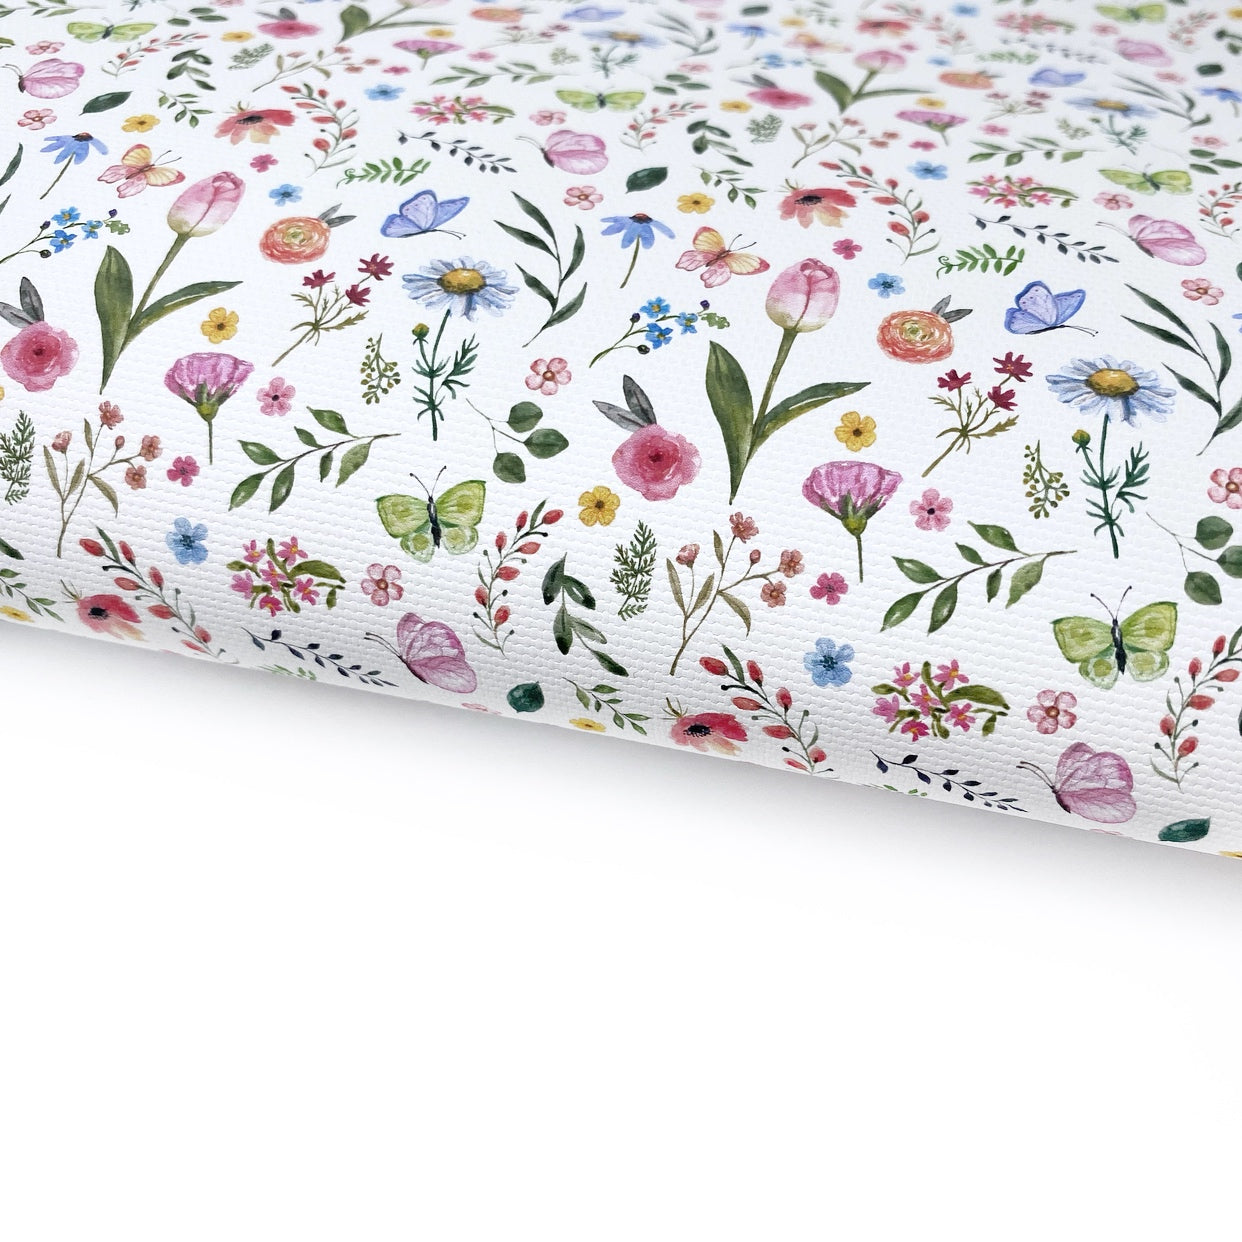 Butterfly Meadow Lux Premium Printed Bow Fabric